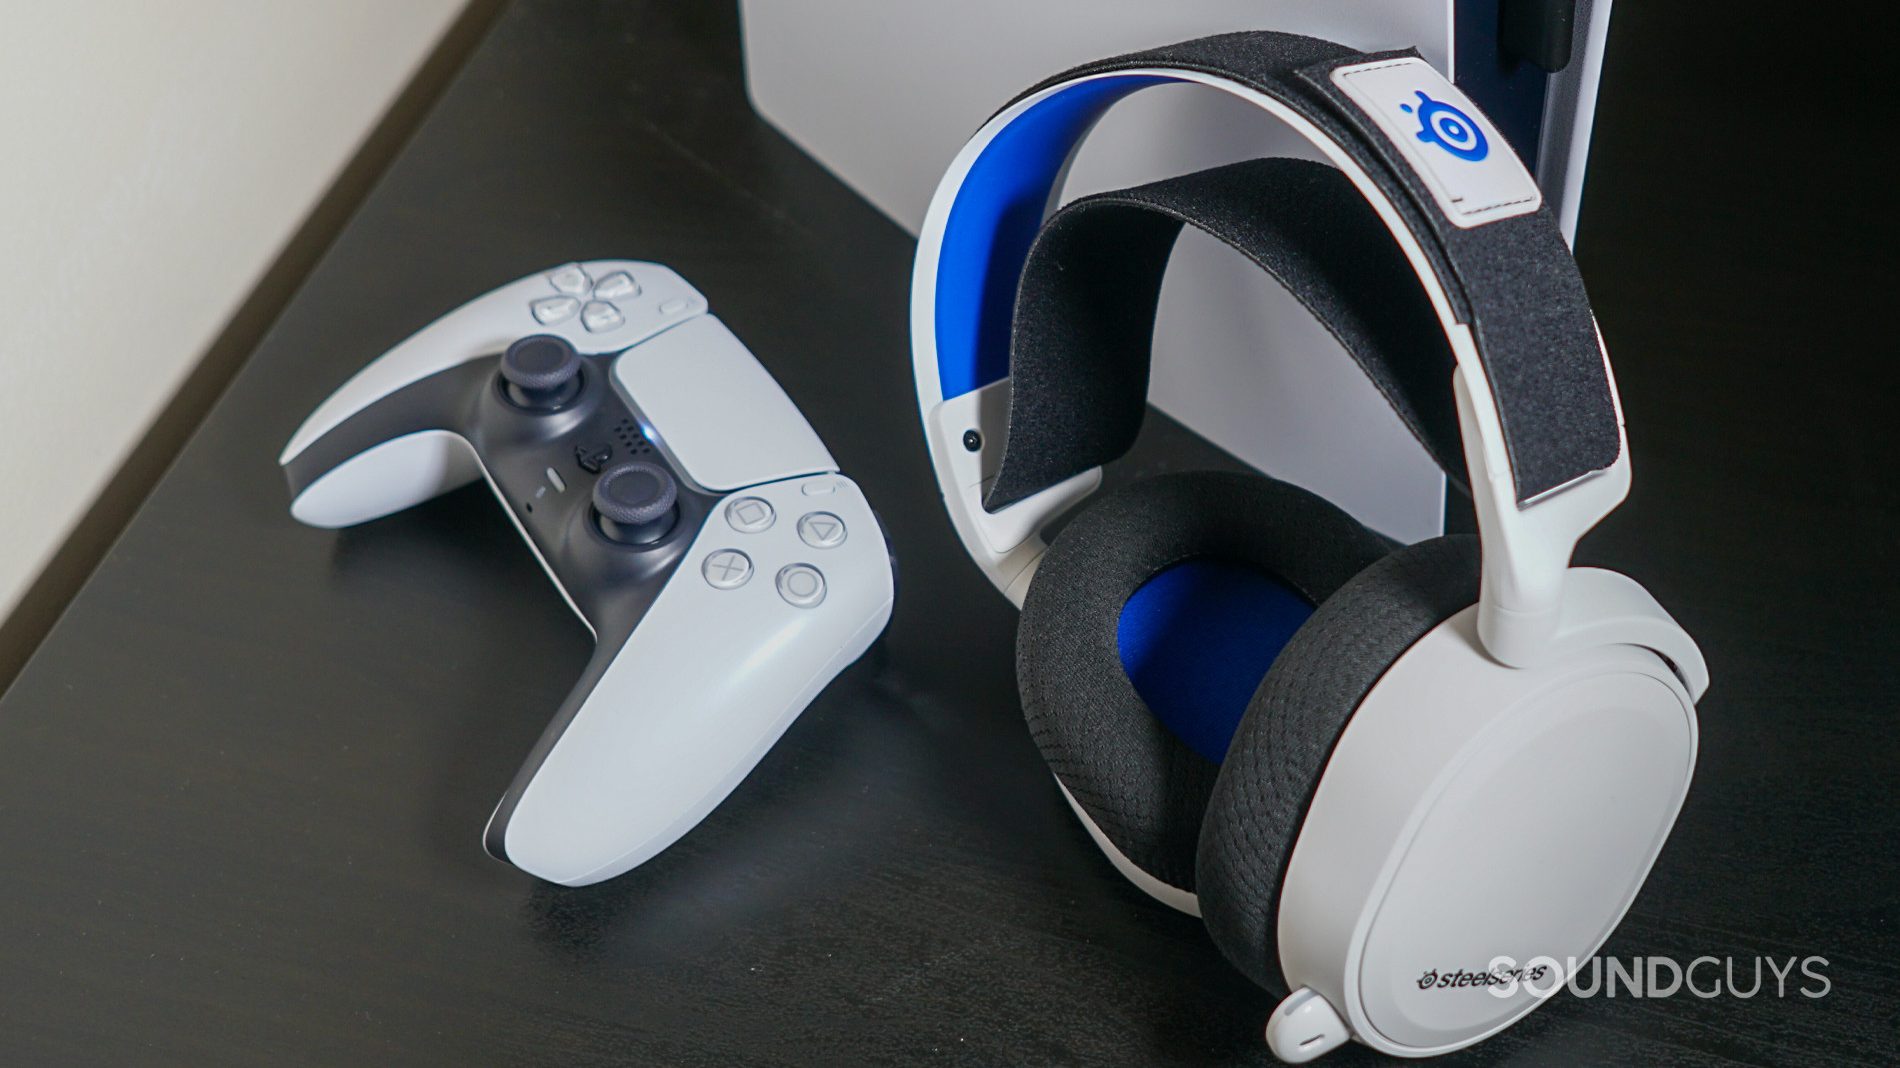 This is the definitive edition of a headset for PS5. And quite